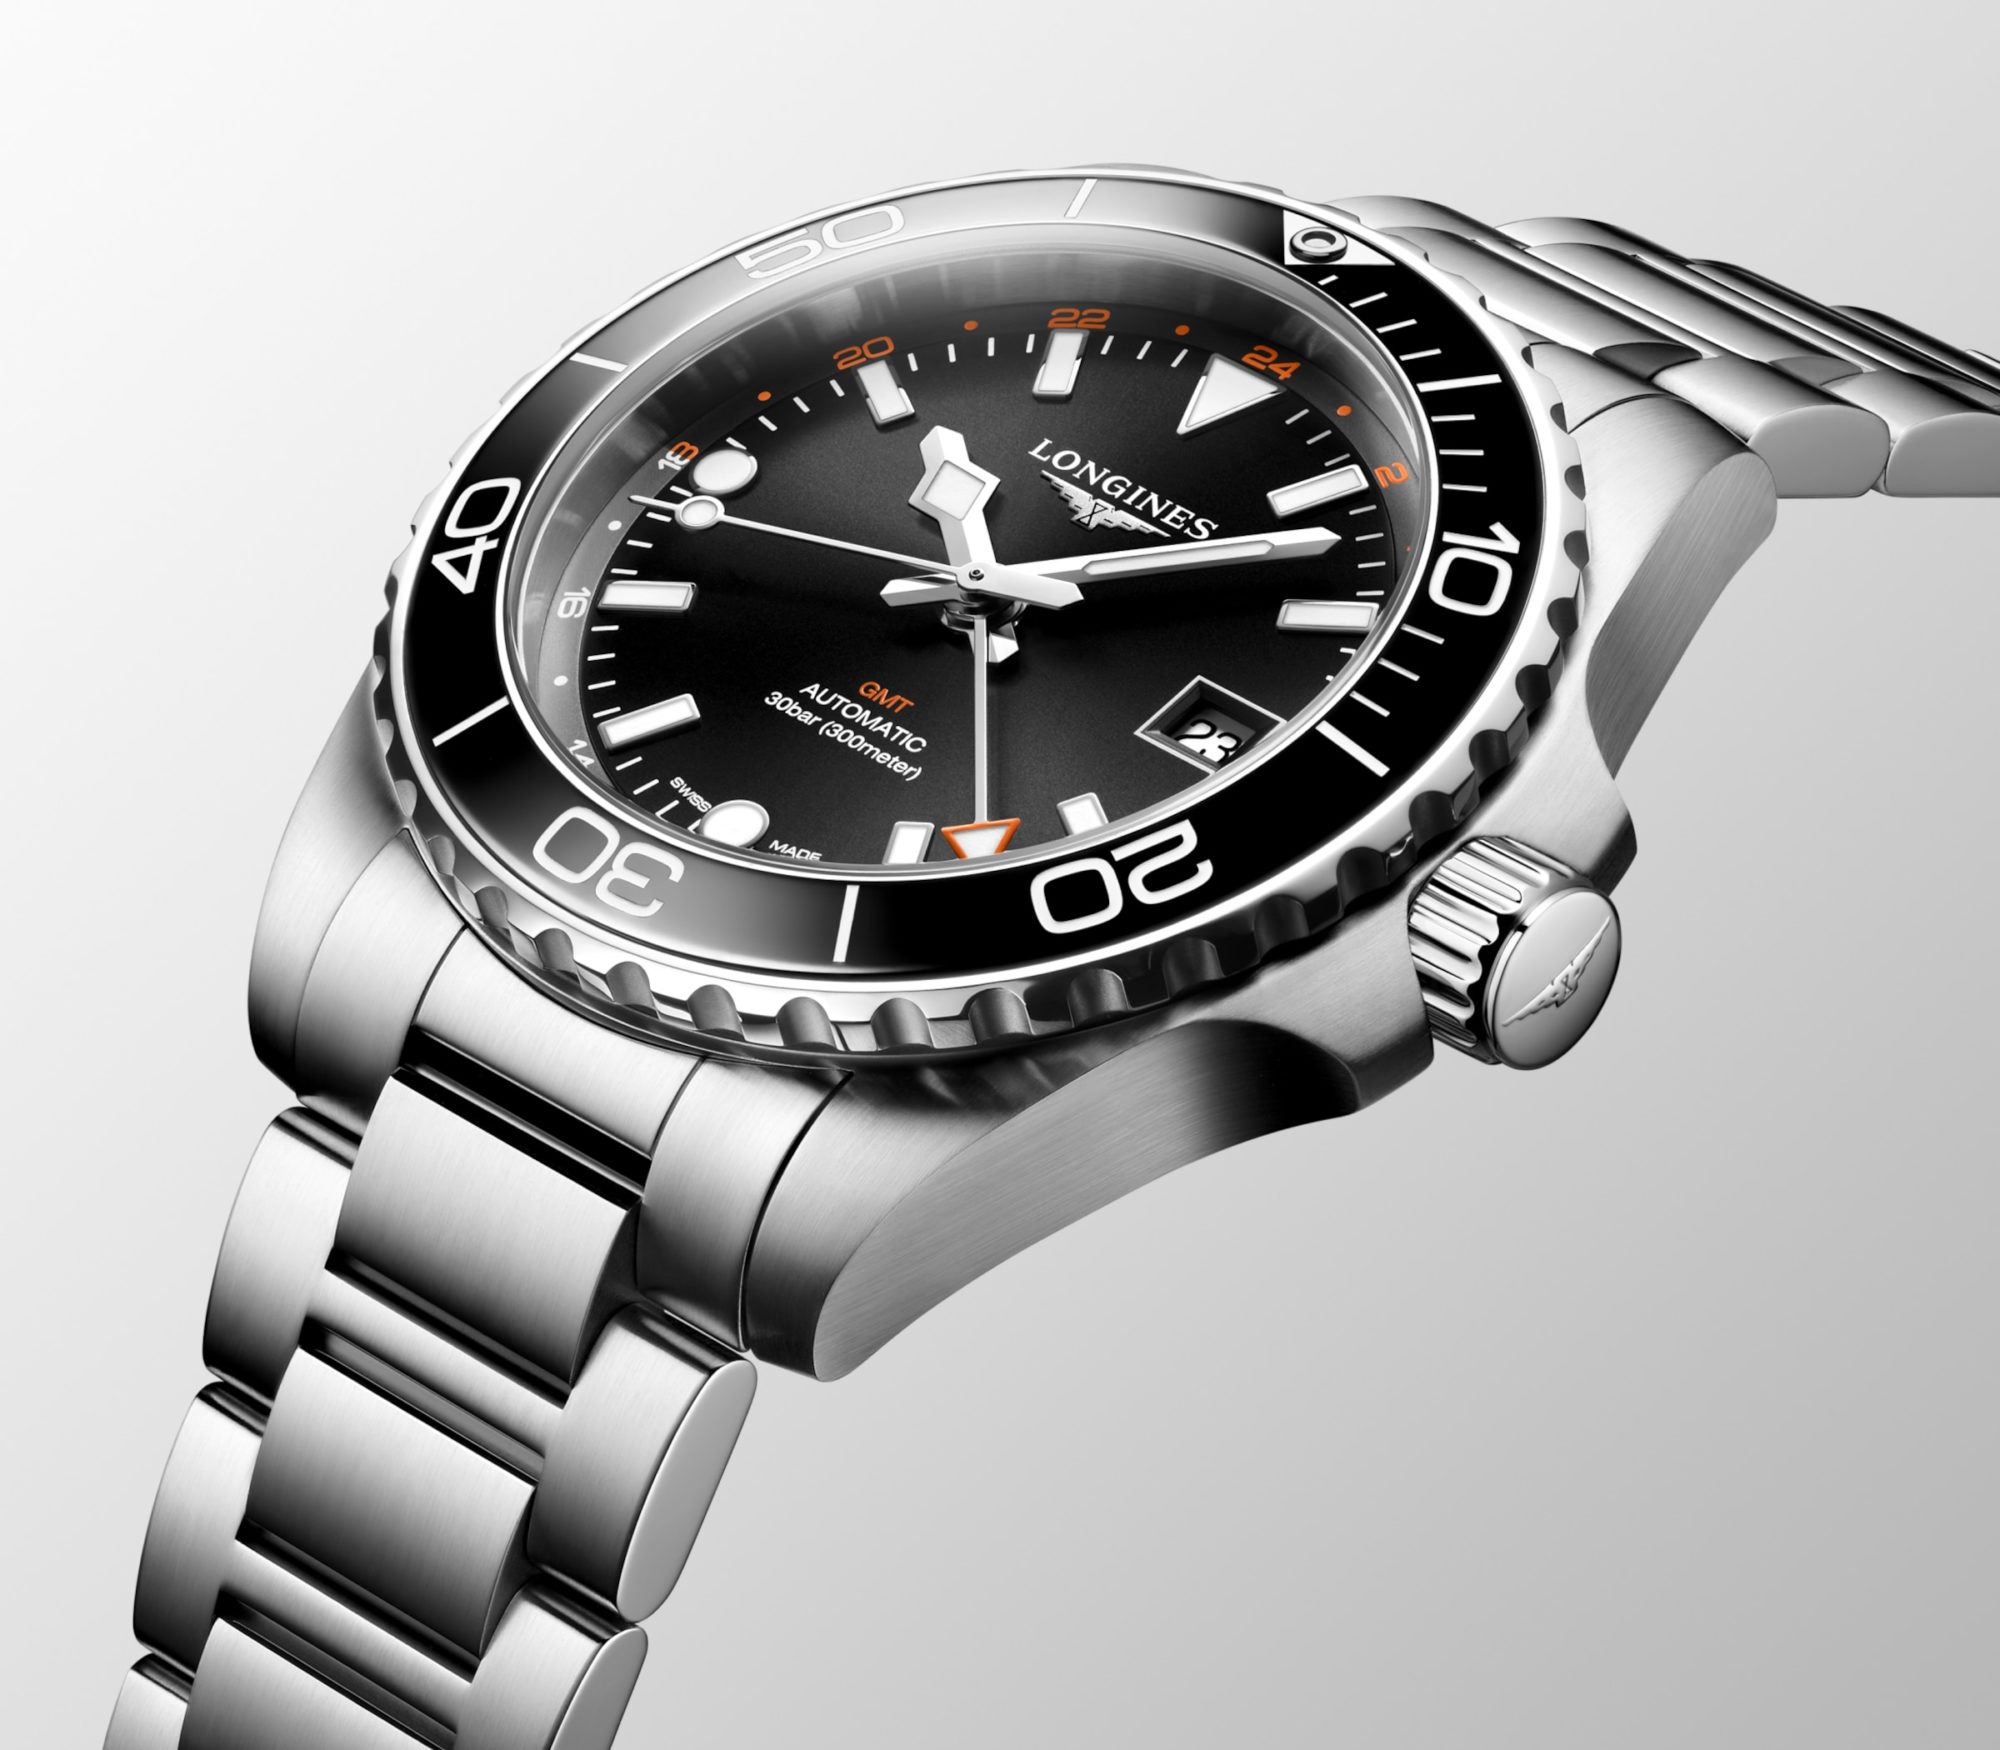 LONGINES HYDROCONQUEST GMT AUTOMATIC 41 MM STAINLESS STEEL AND CERAMIC BLACK WITH SUNRAY EFFECT